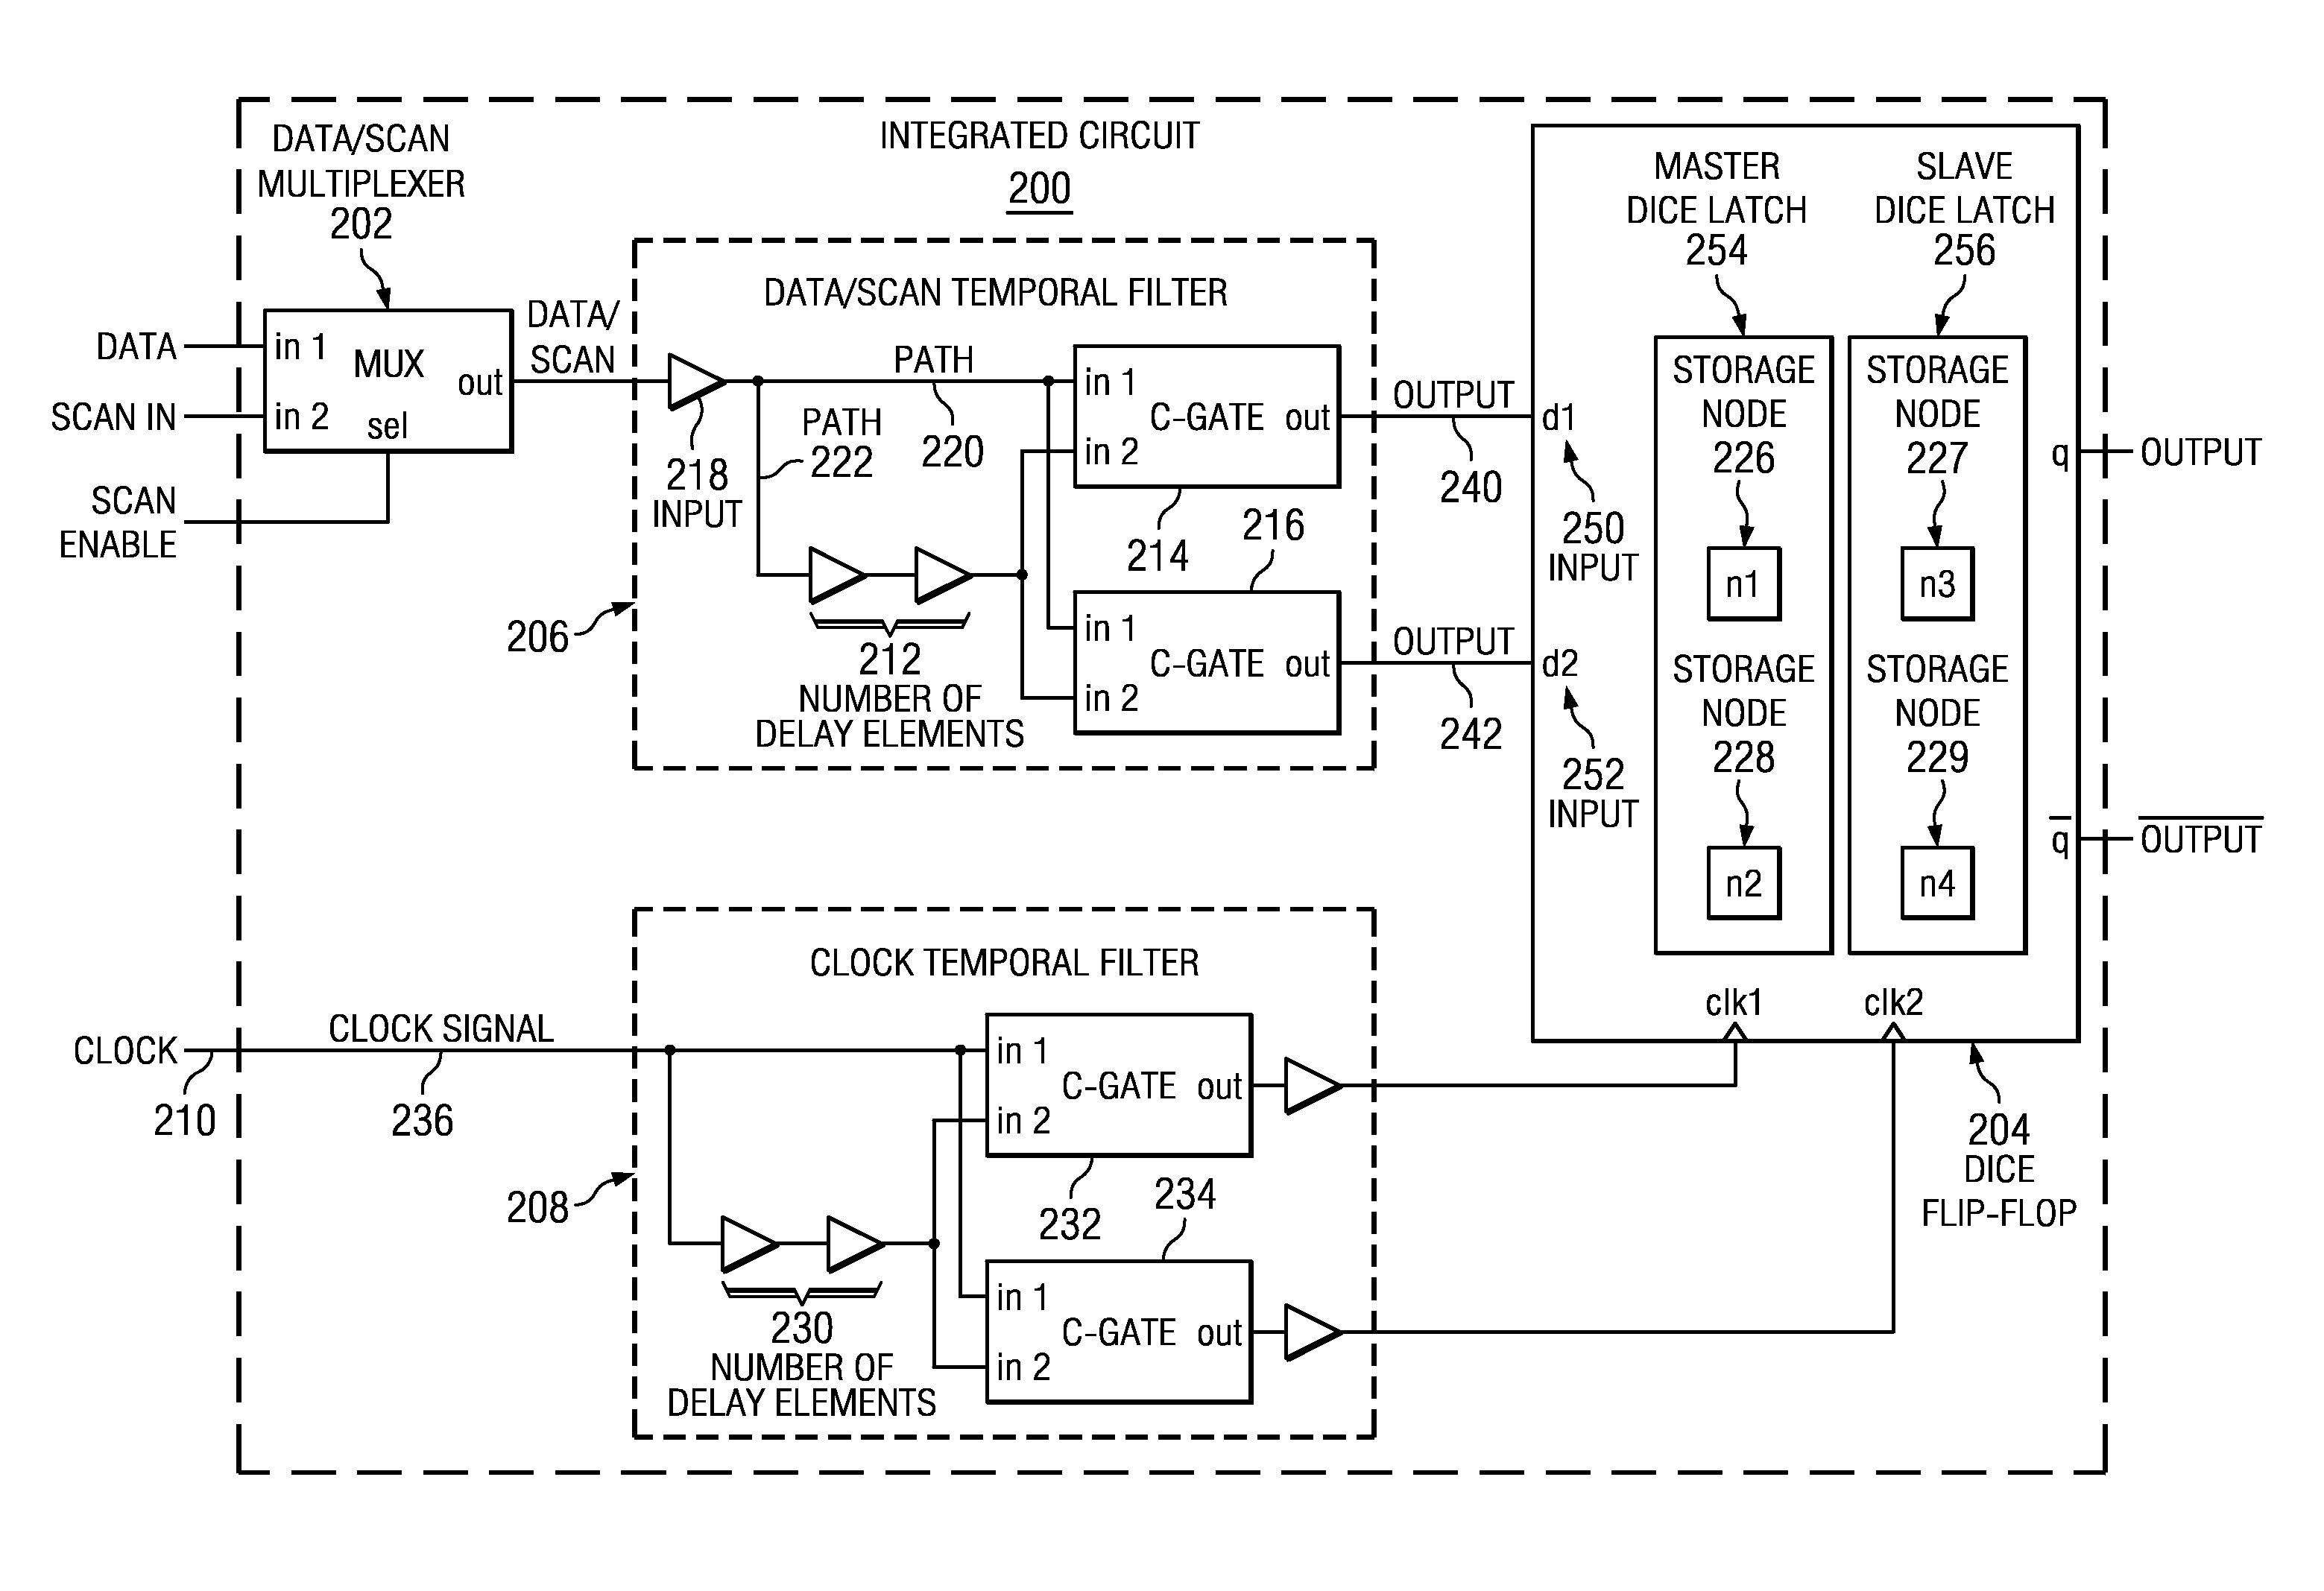 Method and apparatus for reducing radiation and cross-talk induced data errors